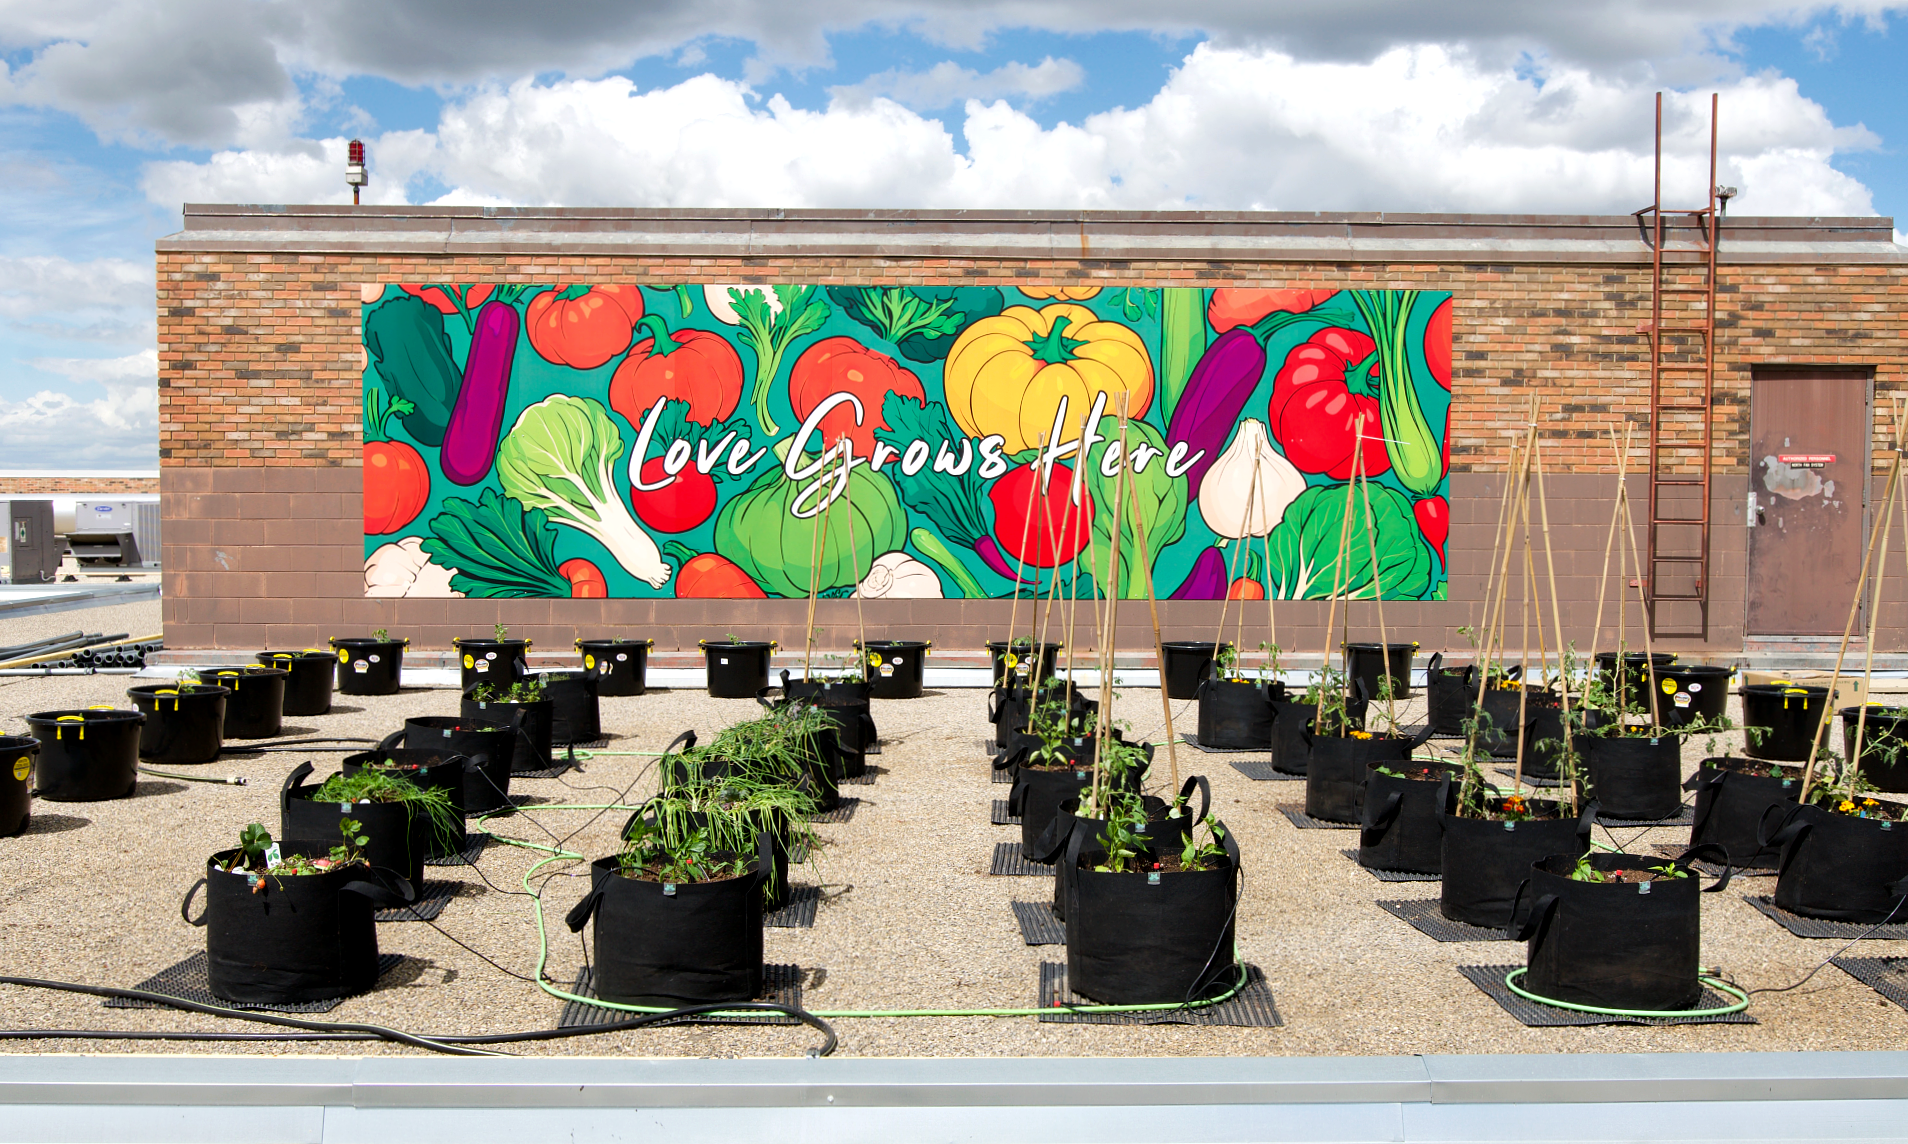 Kingsway Mall's rooftop garden, featuring planters and a painted mural of vegetables with "Love Grows Here" text